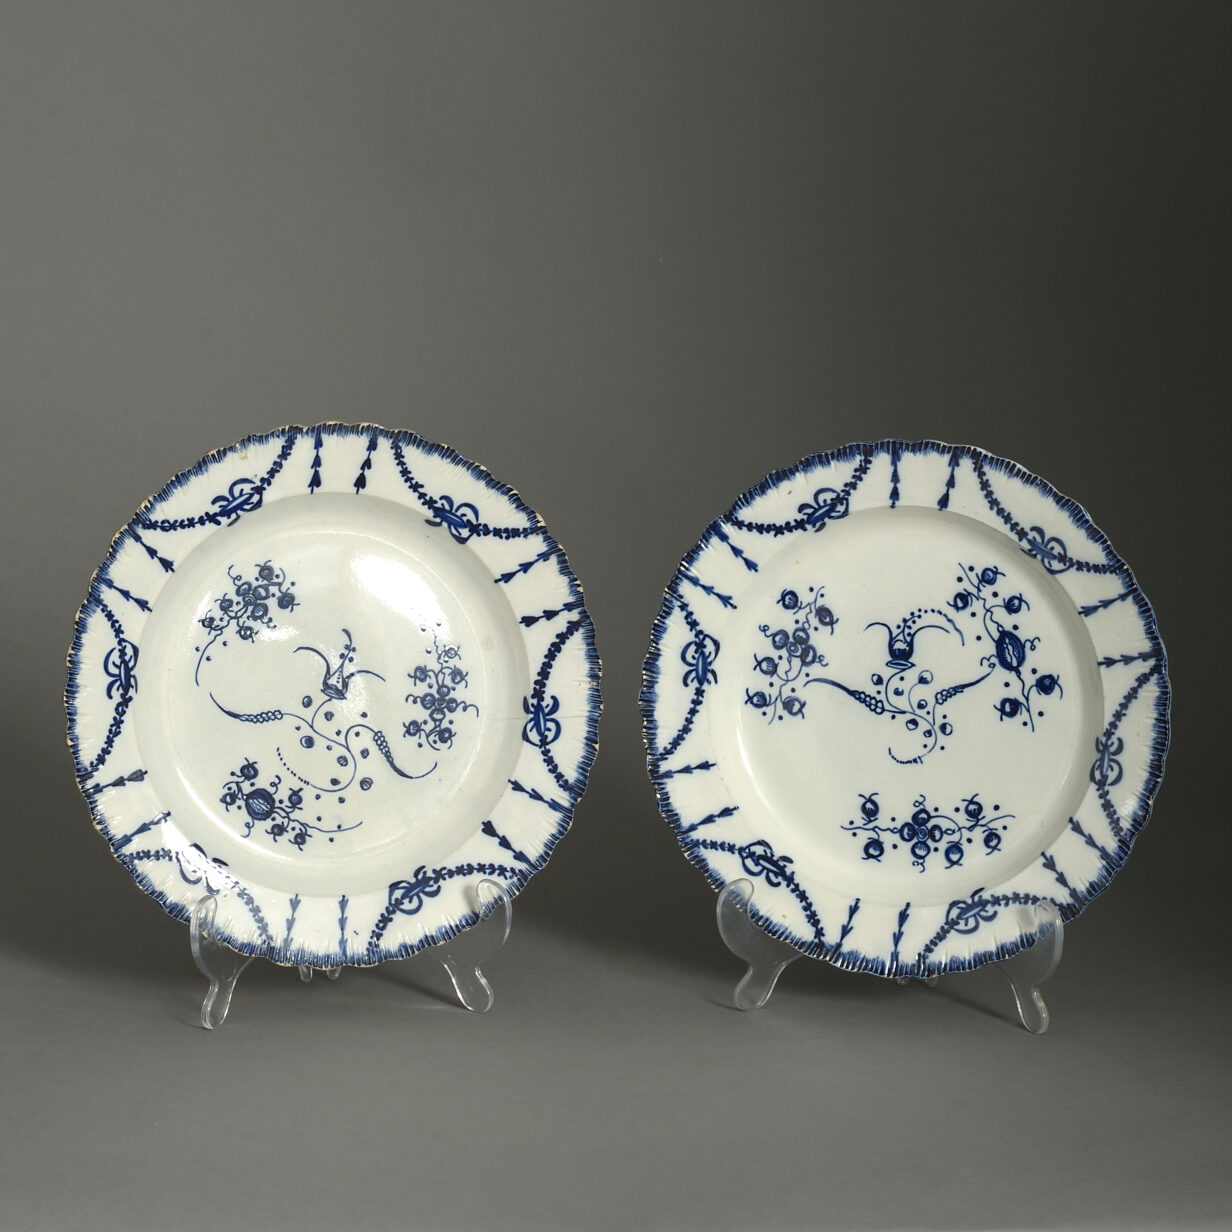 Pair of staffordshire pottery blue and white plates